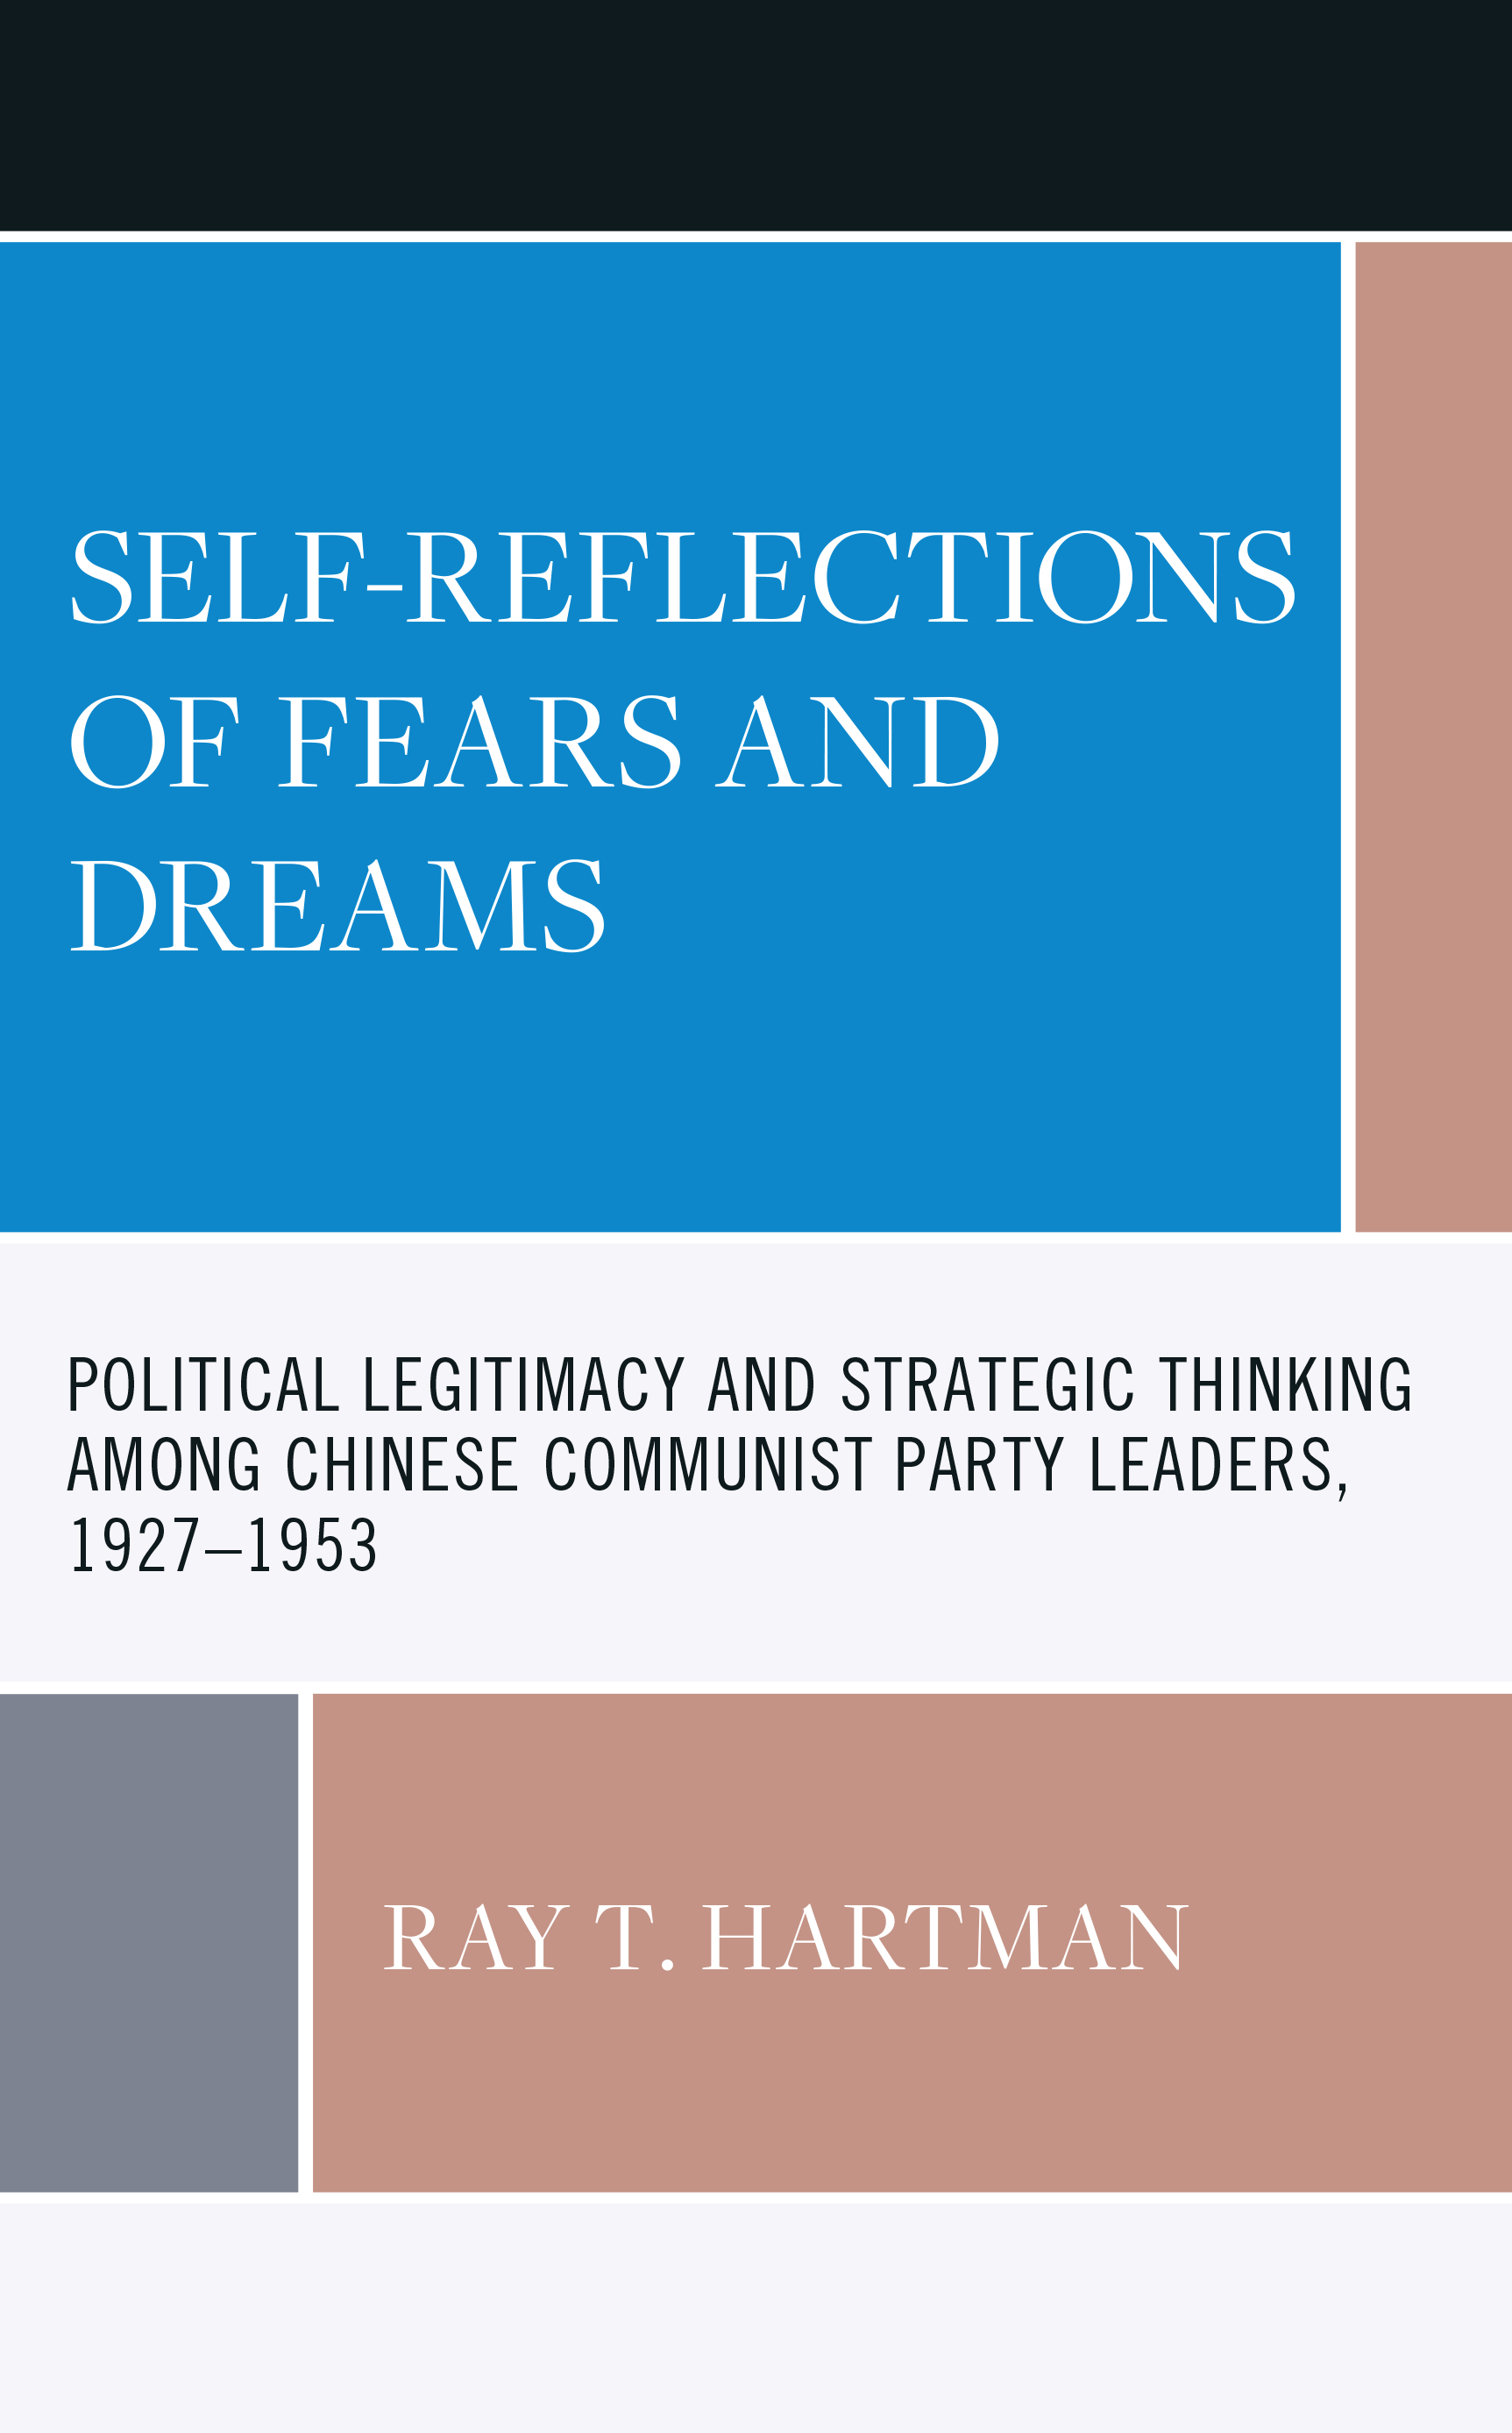 Self-Reflections of Fears and Dreams: Political Legitimacy and Strategic Thinking among Chinese Communist Party Leaders, 1927-1953